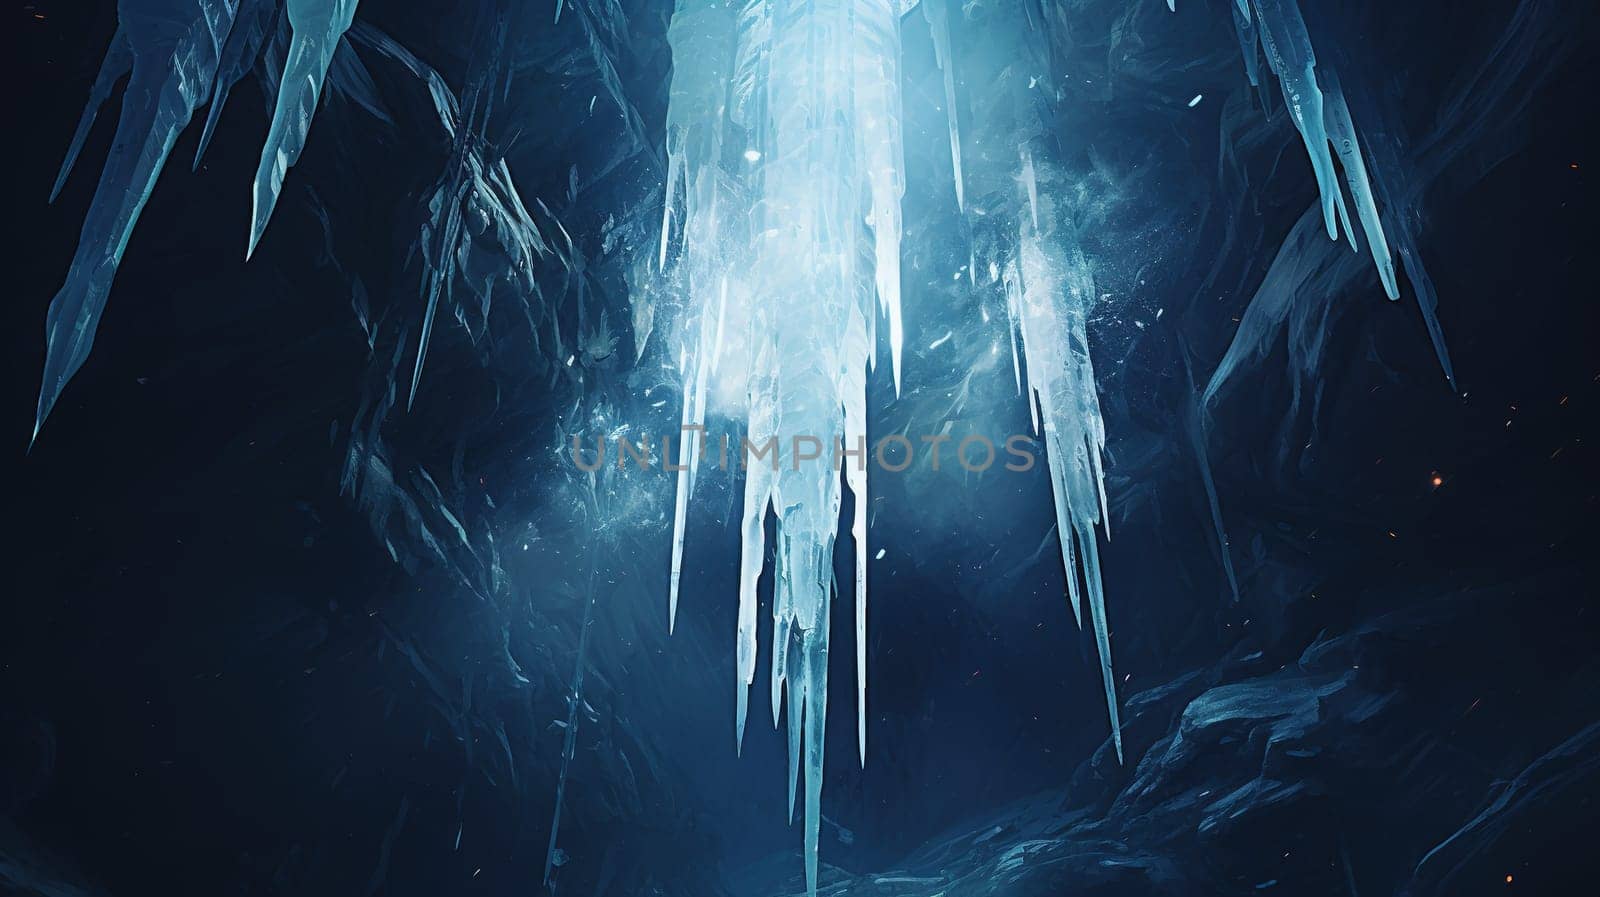 Frosty ice cave with huge icicle around, nature concept by Kadula